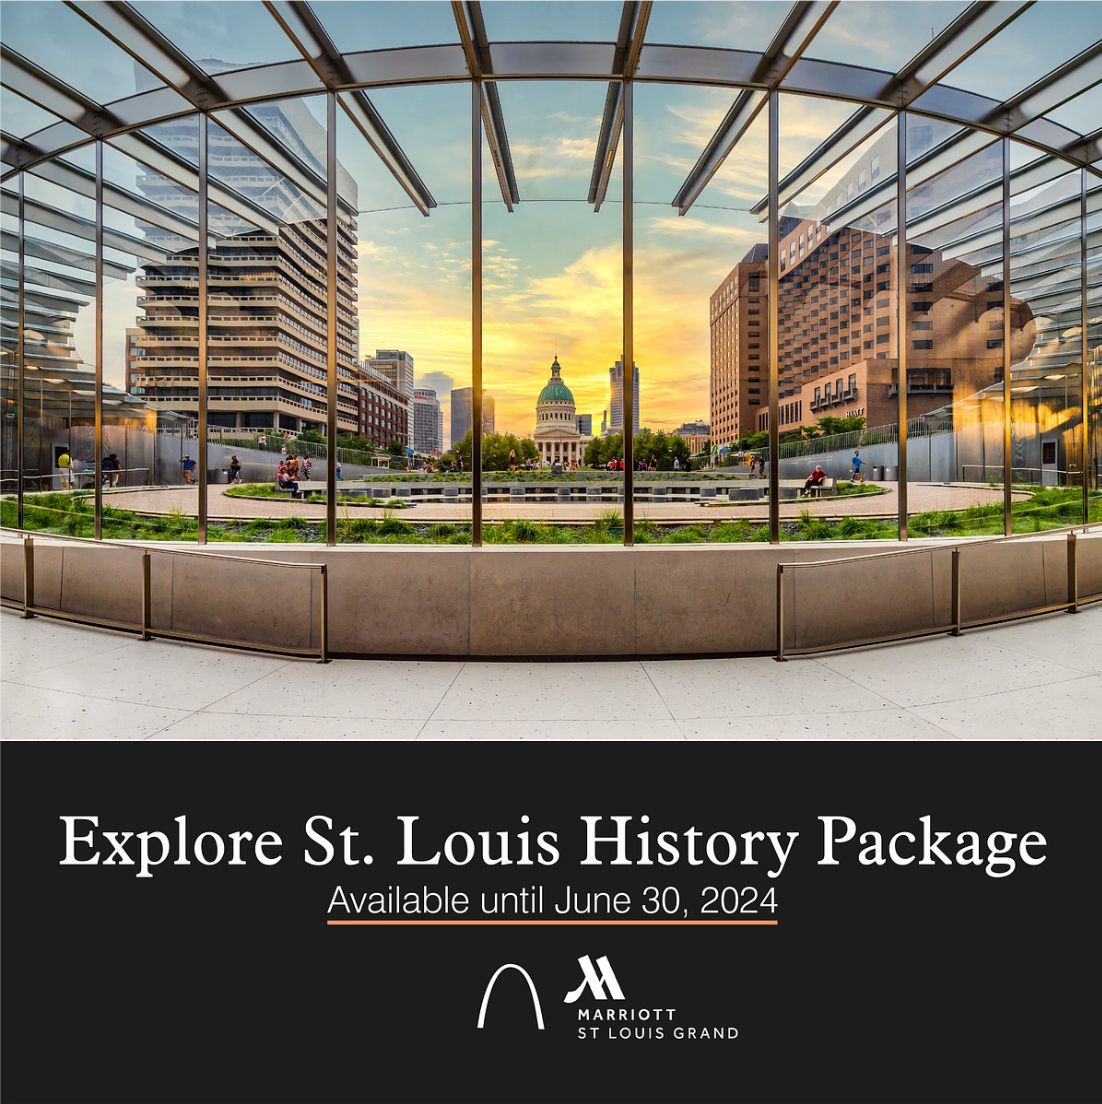 Explore St. Louis while staying in the heart of the city.

Book your next trip with Marriott St. Louis Grand's Explore St. Louis History: buff.ly/430HCdK
.
.
#MarriottStLouisGrand #HelloSTL #HelloMarriottSTL #explorestlouis #staycation #explorestl #travelstl #STLhistory